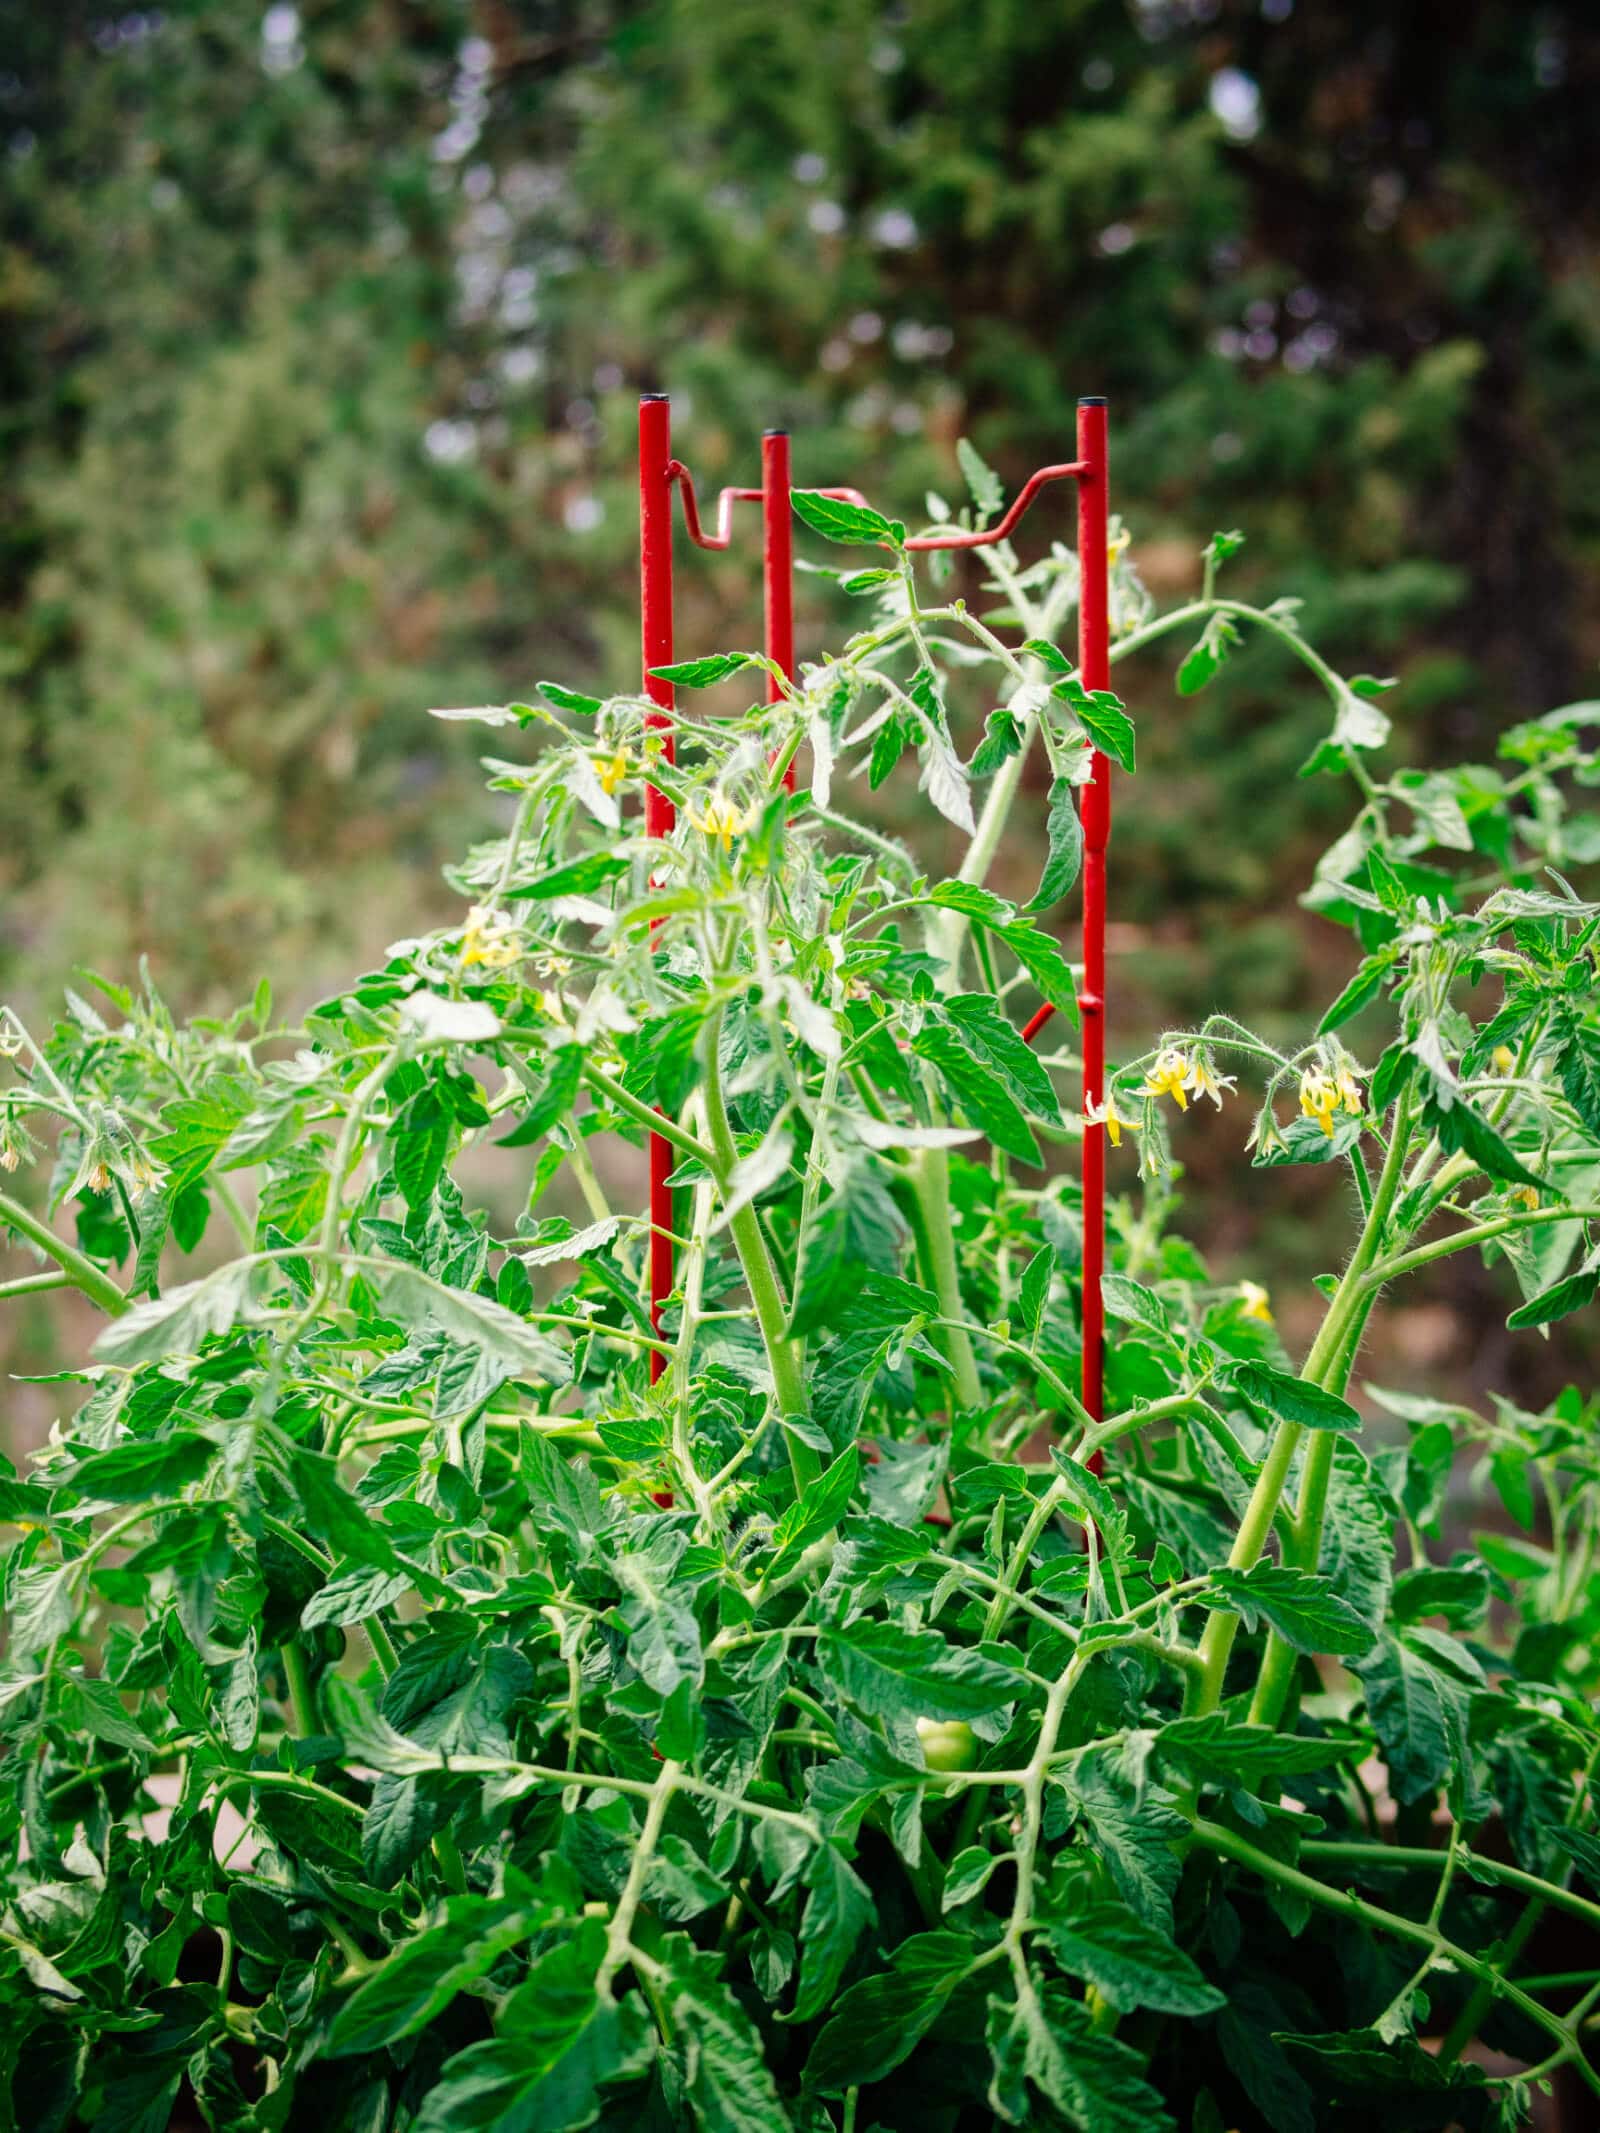 Tomato ladders can support even the tallest tomato vine